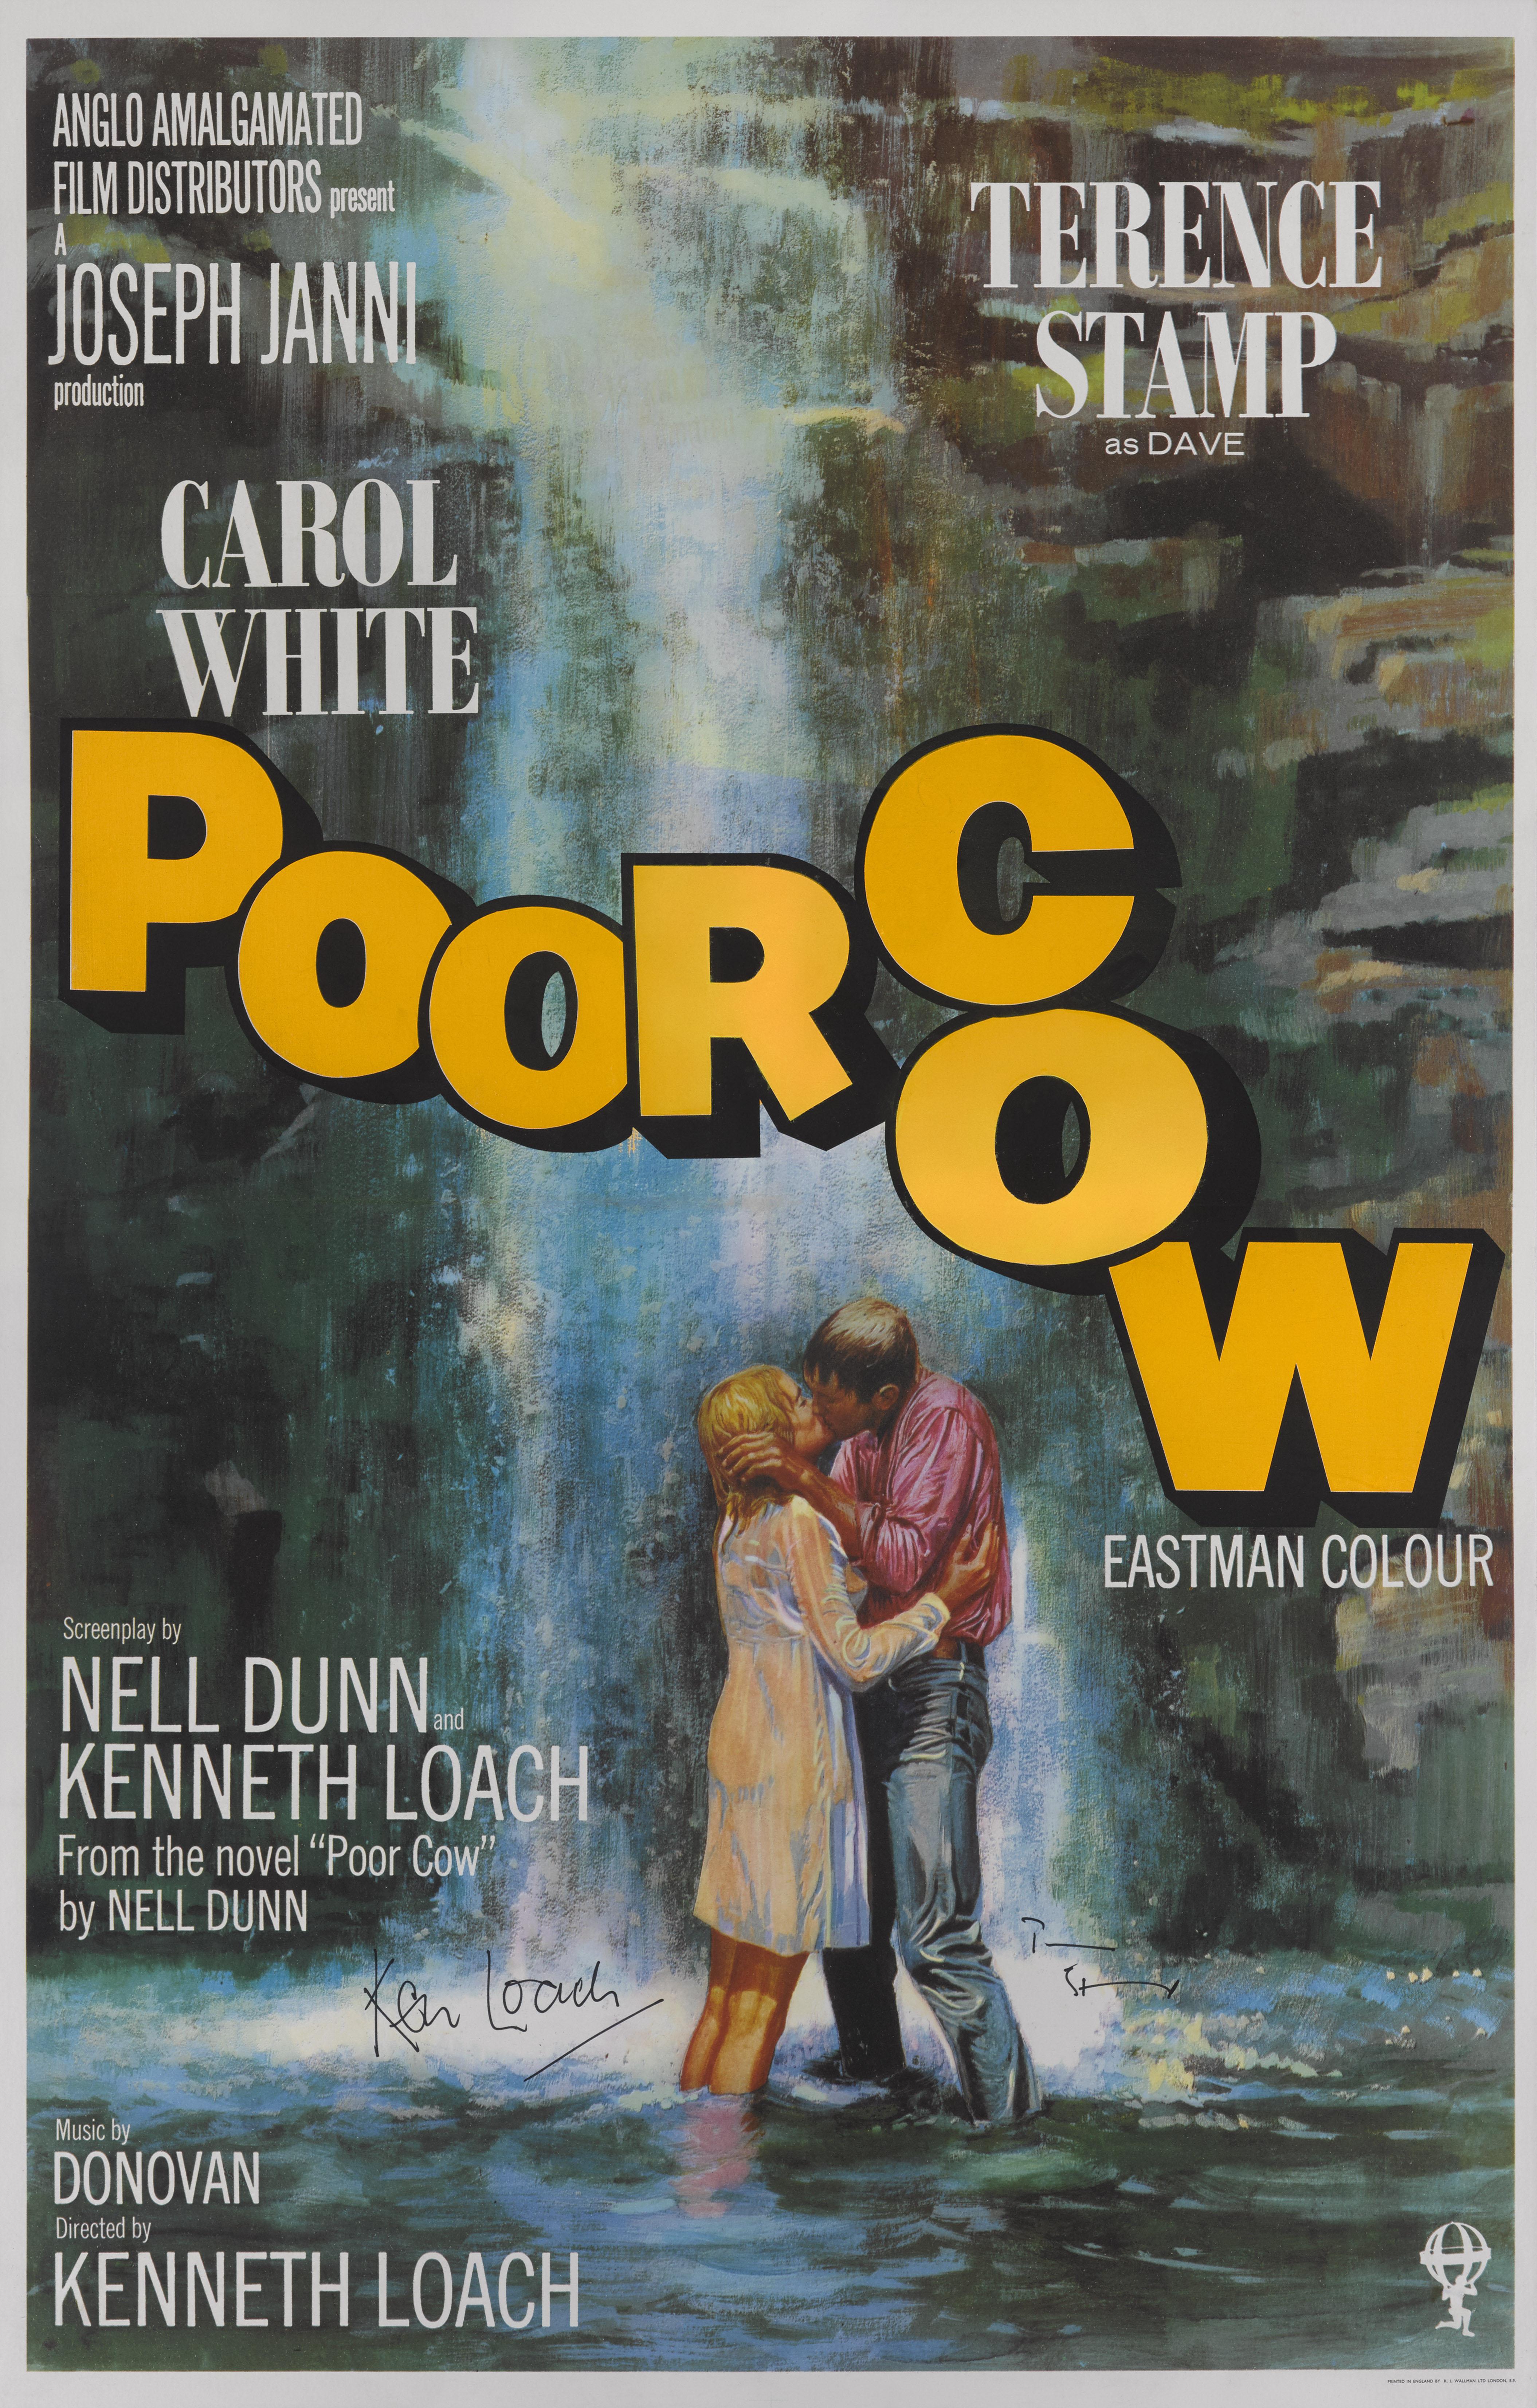 Original British film poster for the 1967 British film directed by Ken Loach, and was his first feature film. It stars Terence Stamp, Carol White, and John Bindon. It is set in London, and is about a young woman who has made some bad life choices,